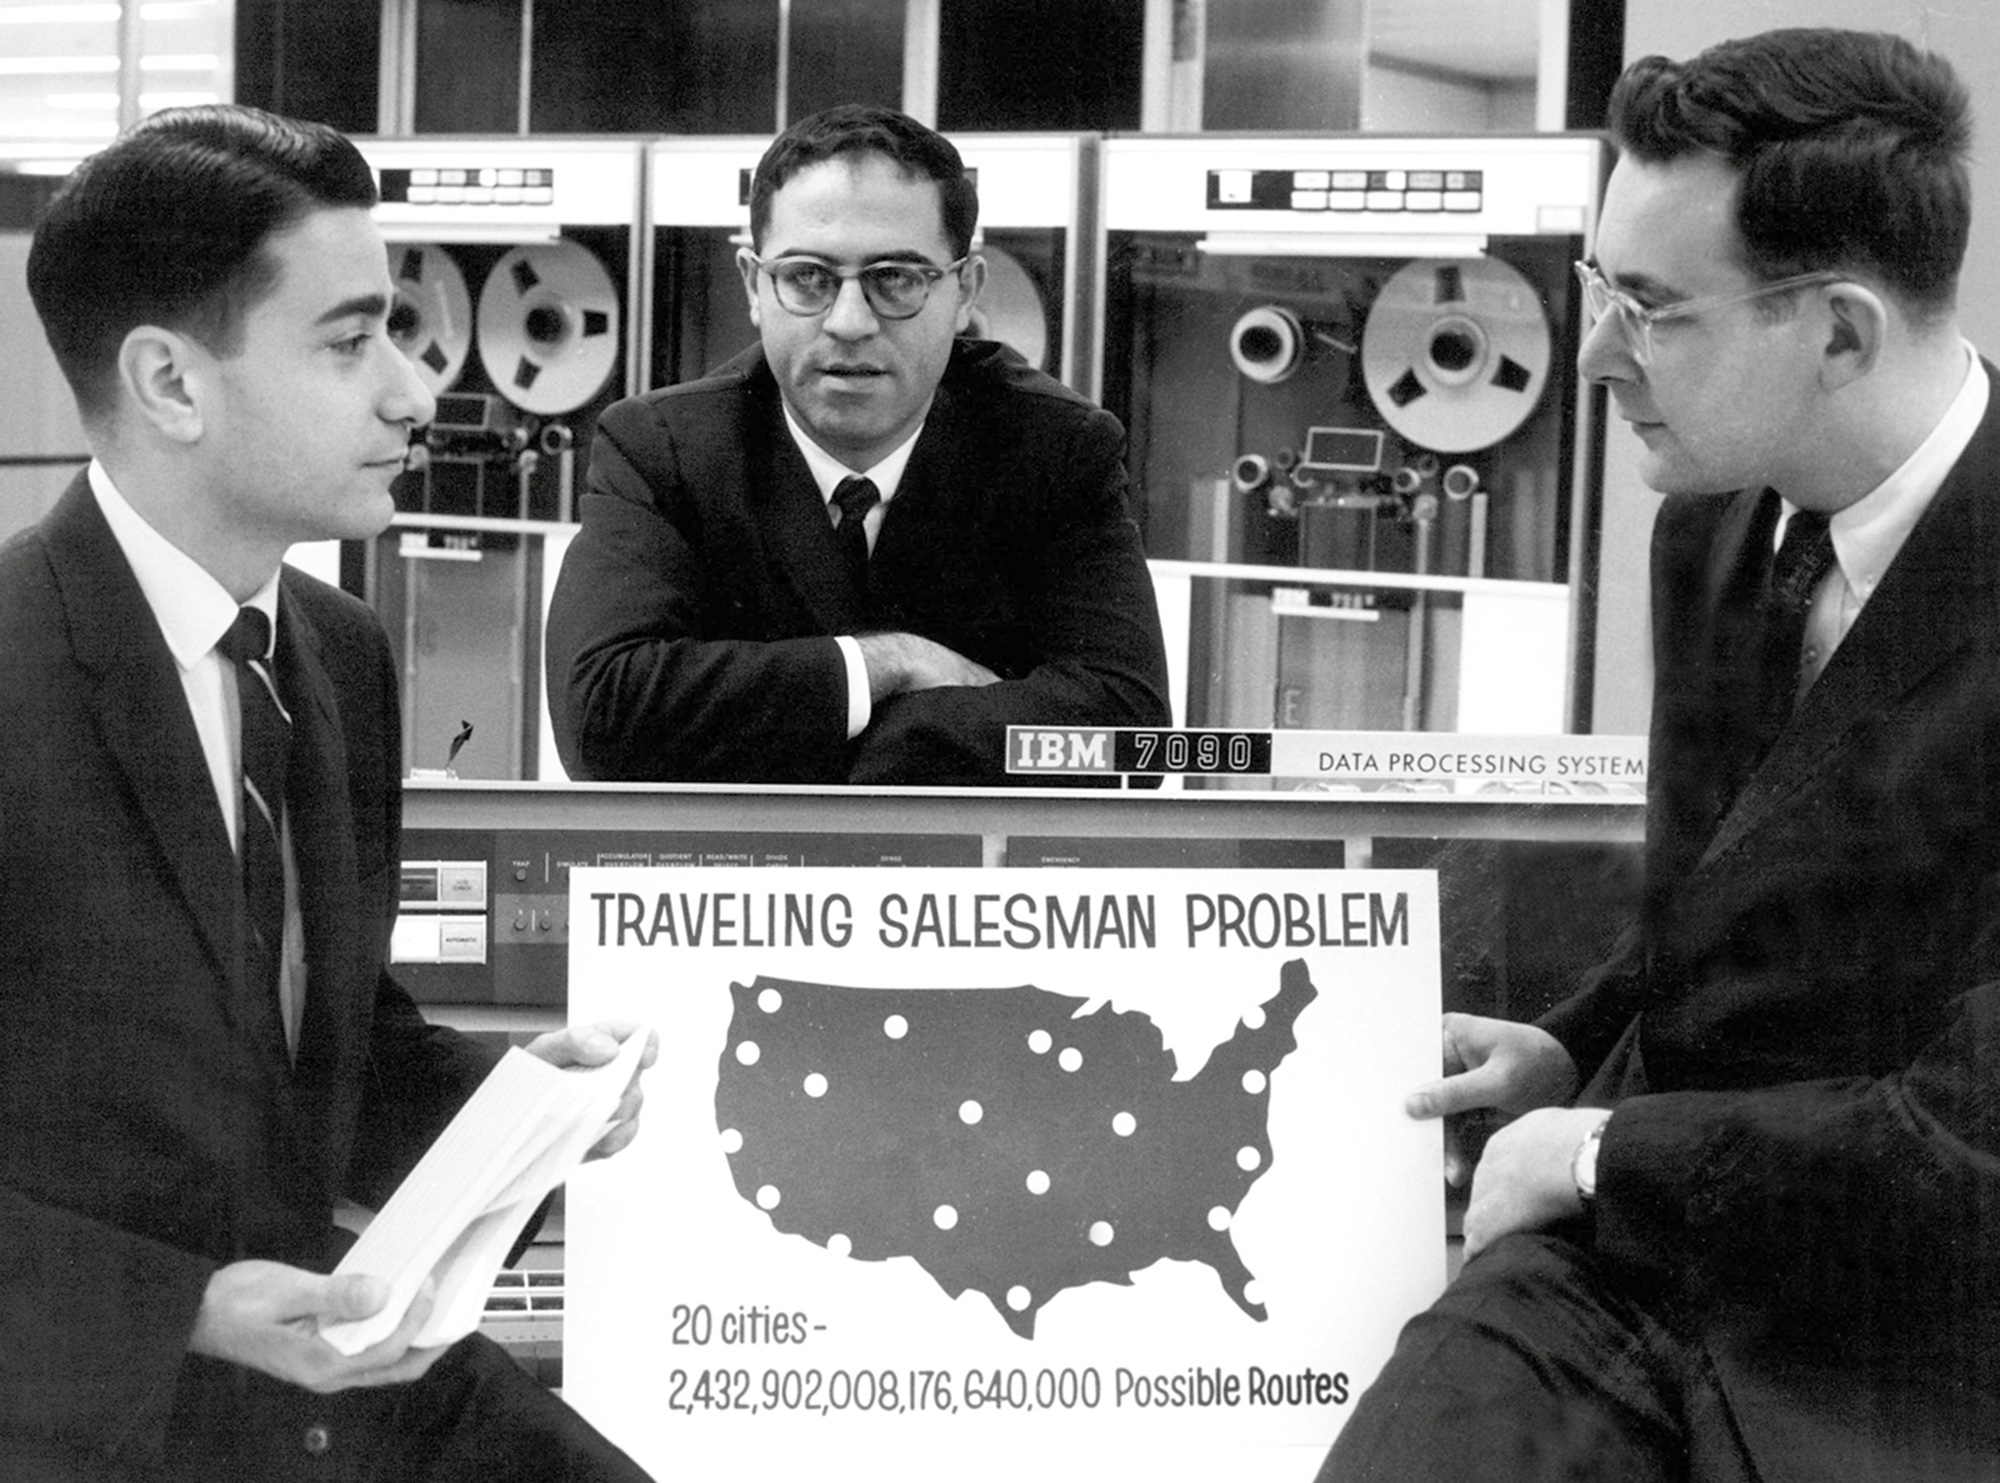 A photograph of three men who researched the Traveling Salesman Problem. The early nineteen sixties saw the earliest intensive use of electronic computers in TSP research. The new computational power changed the kinds of solution strategies available. TSPs are solved by adopting a variety of tactics that narrow the domain of possible routes, or otherwise point out promising avenues. These approaches are often very beautiful (one of the most intuitive and elegant is a mathematical version of ant-swarming behavior, where best routes are amplified over time by means of a build-up of “pheromones”—a sequential weighting of routes that have proven productive in the course of millions of random walks). Richard Karp, shown at right here with colleagues at IBM, was a pioneer of what is known as “Branch and Bound” technique. Using it, he and Michael Held (at left) bested Dantzig et al’s forty-nine-city record by producing an optimized fifty-seven-city tour in nineteen sixty-four. 